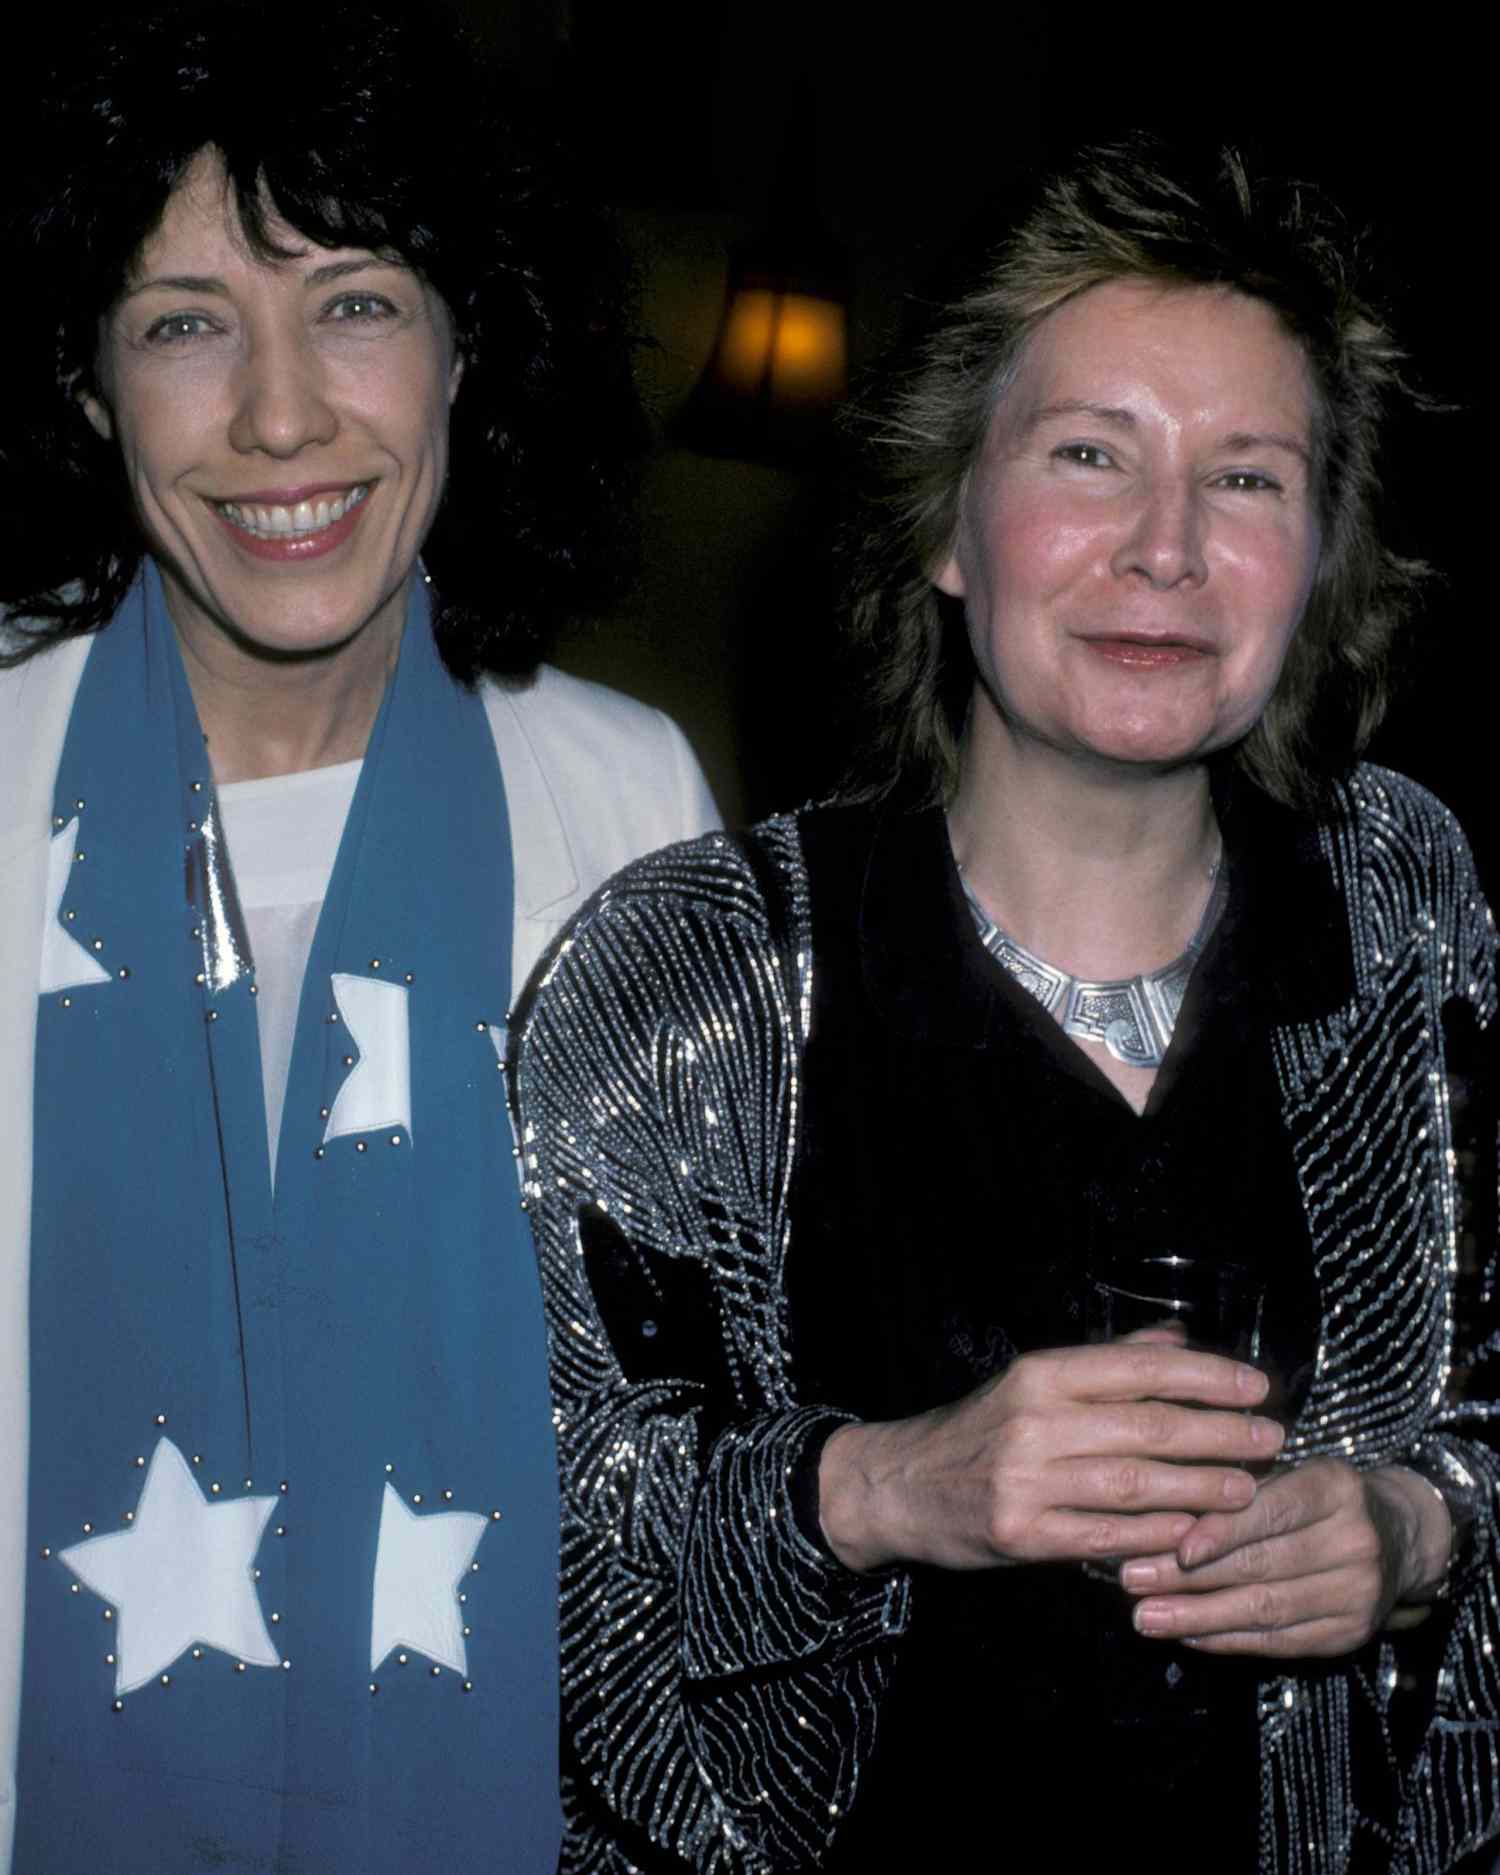 Lily Tomlin & Jane Wagner